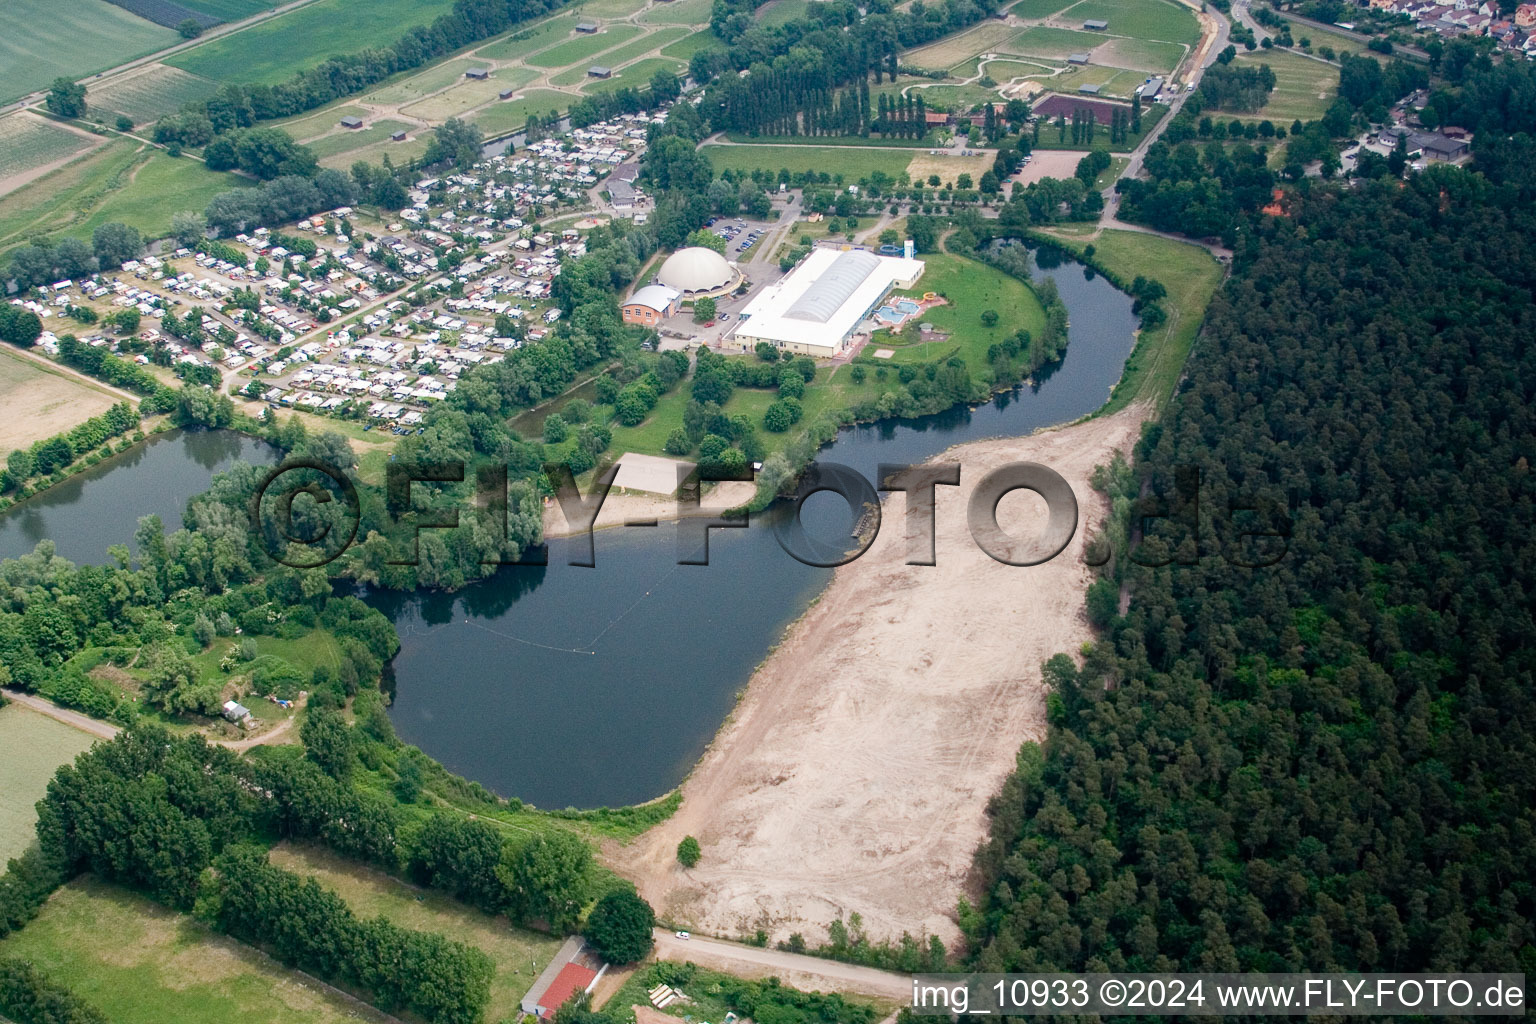 Sandy beach areas on the Badesee Moby Dick in Ruelzheim in the state Rhineland-Palatinate, Germany